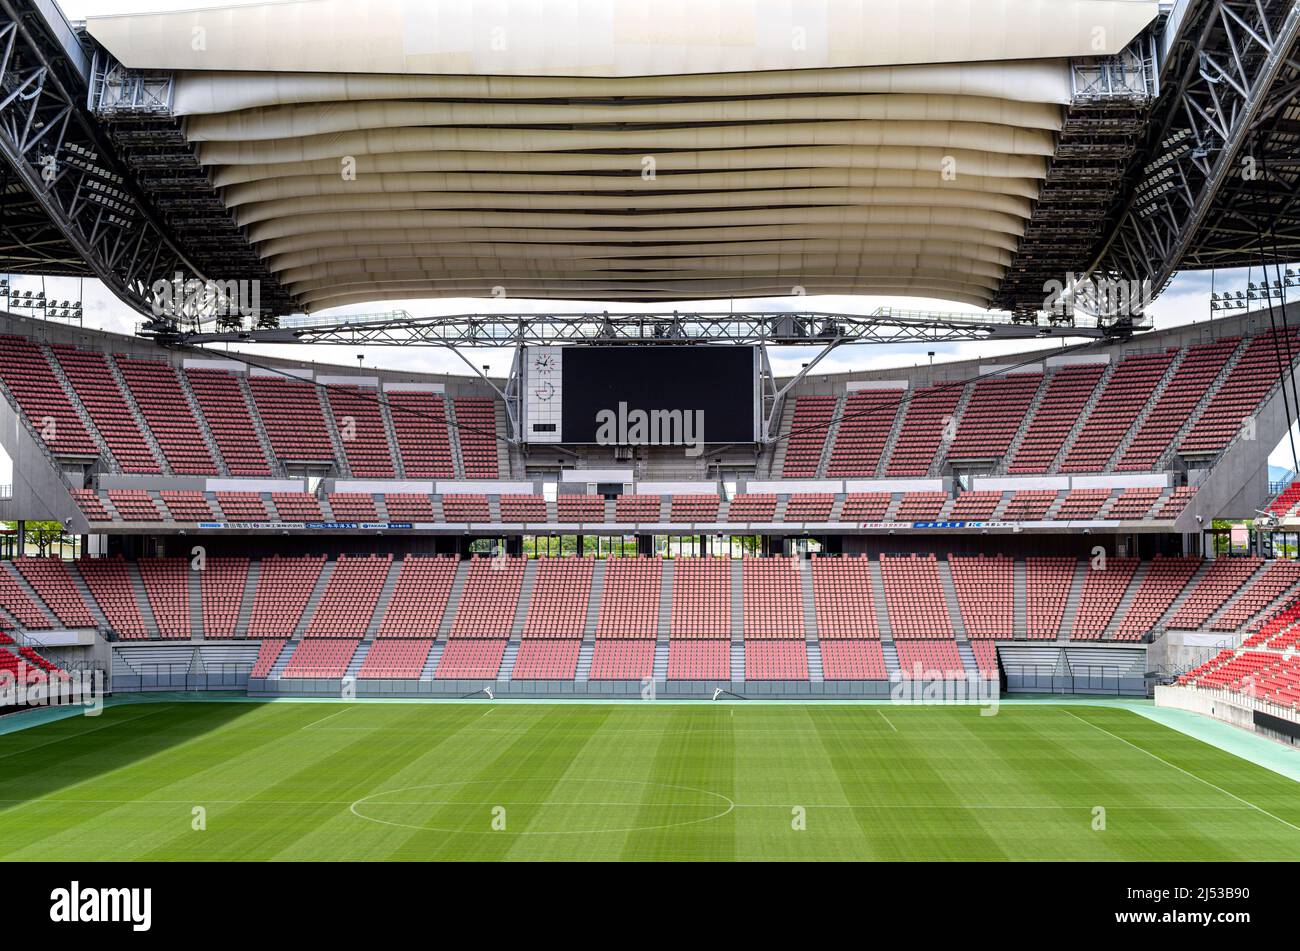 Wide view of an empty Toyota Stadium with its iconic accordion retractable roof. Stock Photo